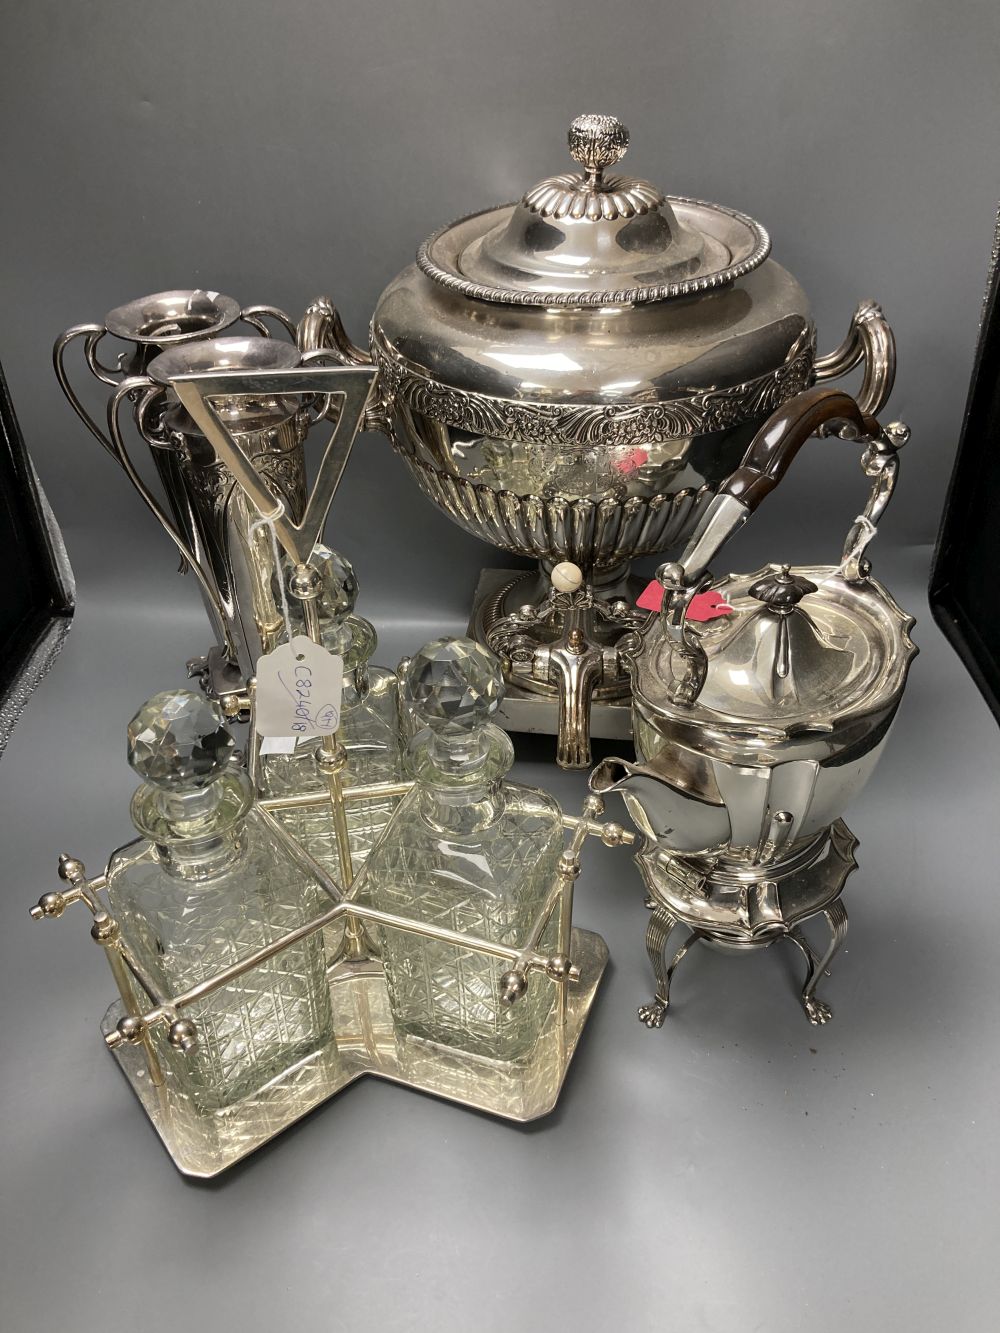 A plated samovar, a kettle on stand, a pair of vases and a three bottle silver plated tantalus and on Old Sheffield plate tea urn, c.18